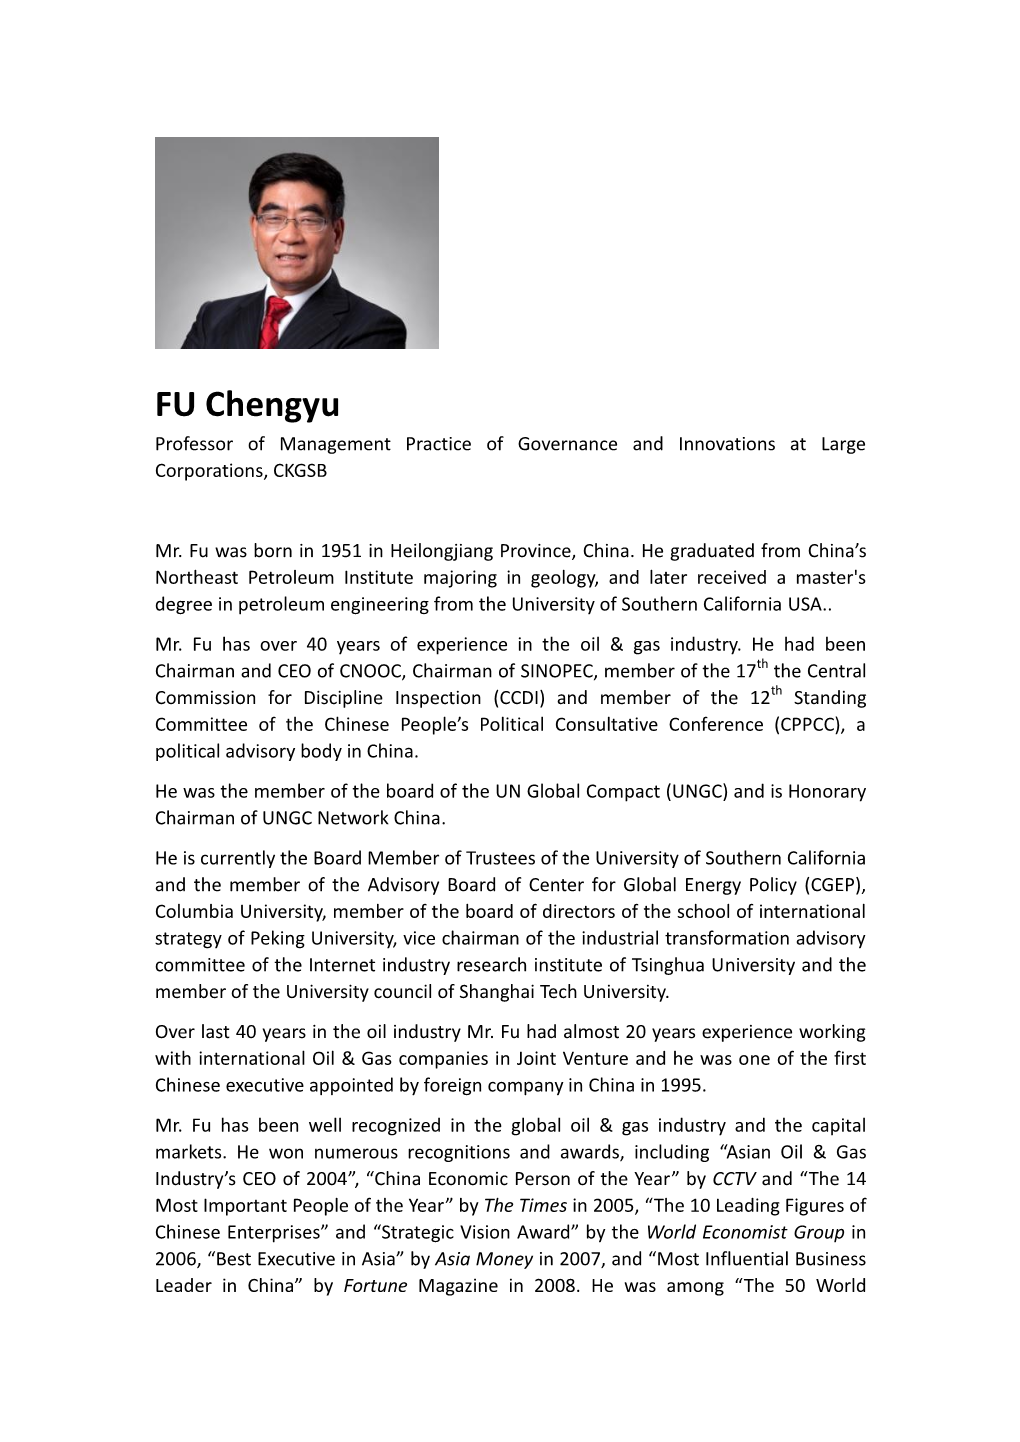 FU Chengyu Professor of Management Practice of Governance and Innovations at Large Corporations, CKGSB